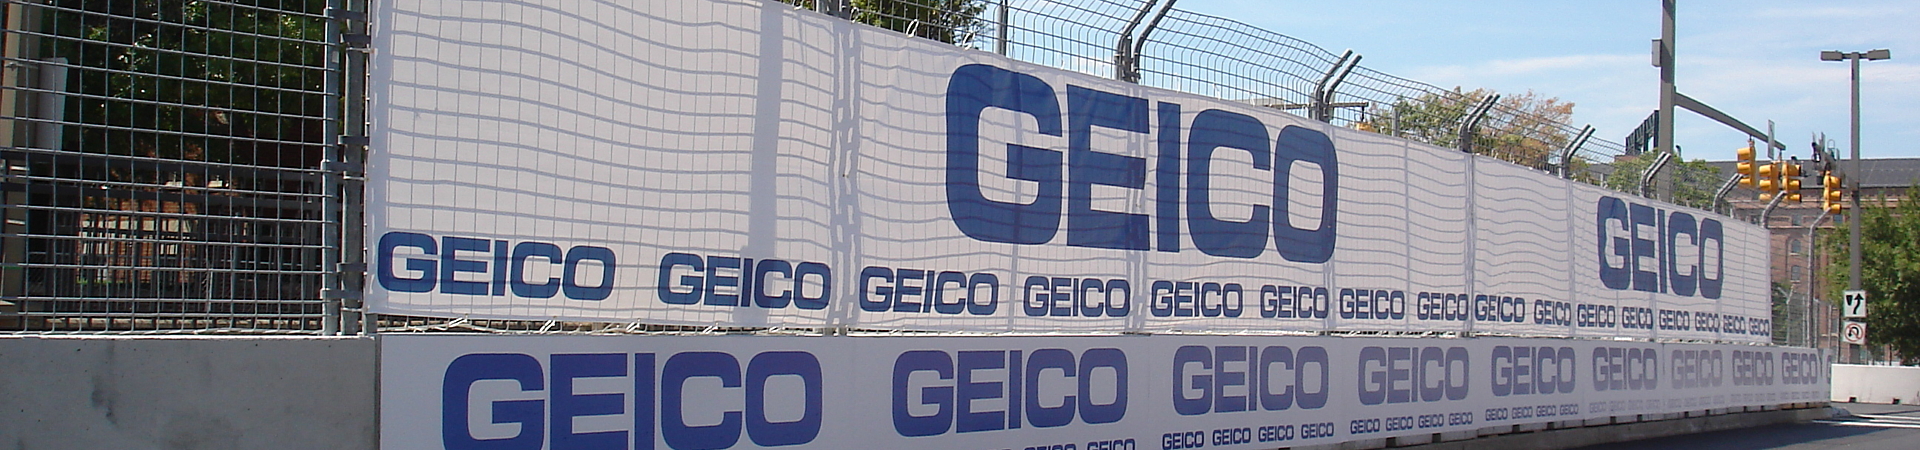 Mesh fence scrim with advertisements covering a construction site.